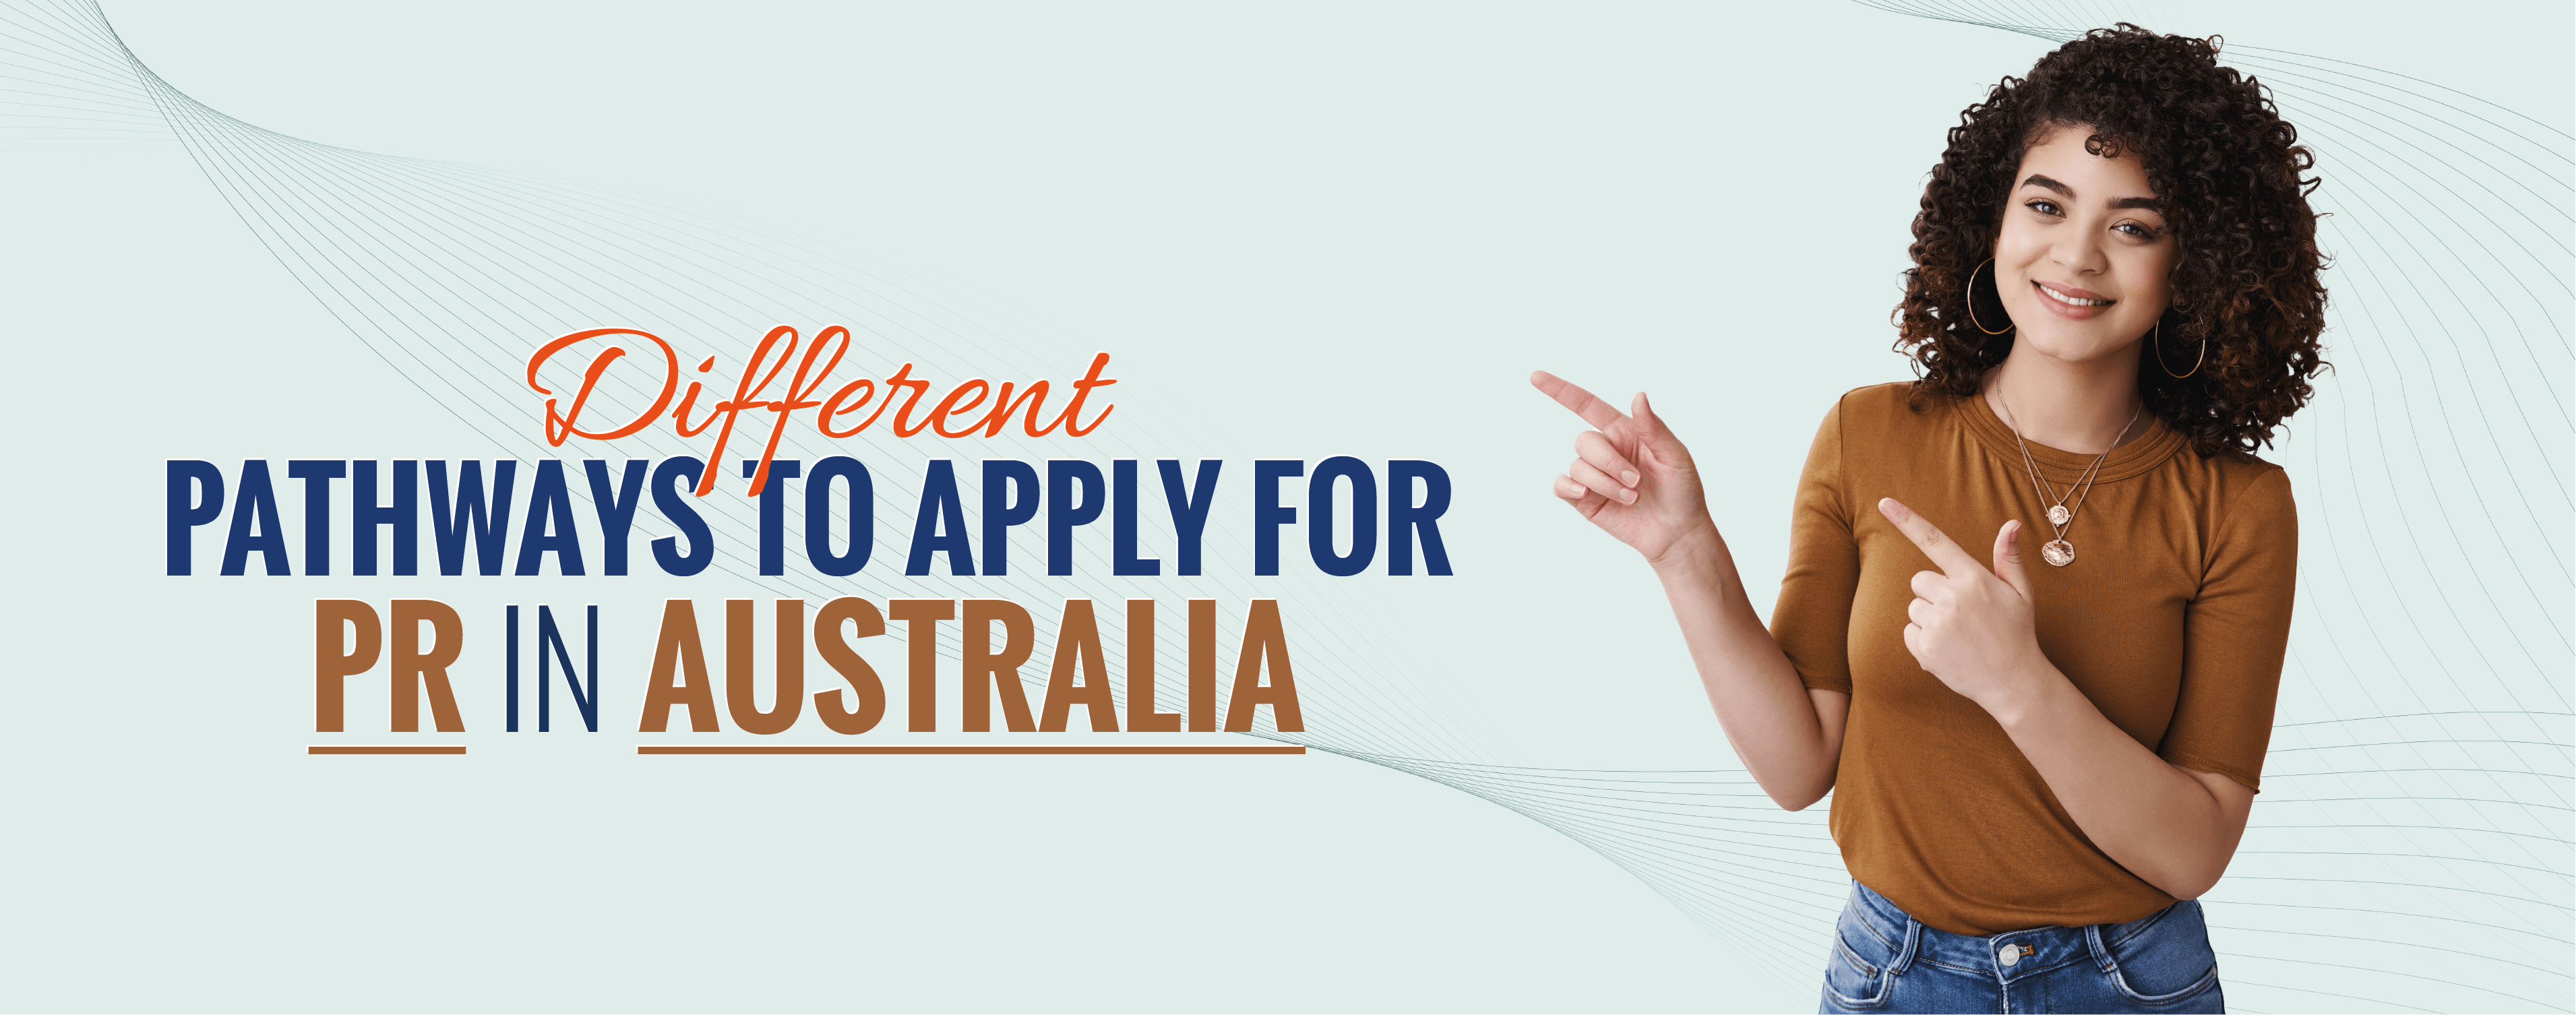 Different Pathways to Apply for PR in Australia